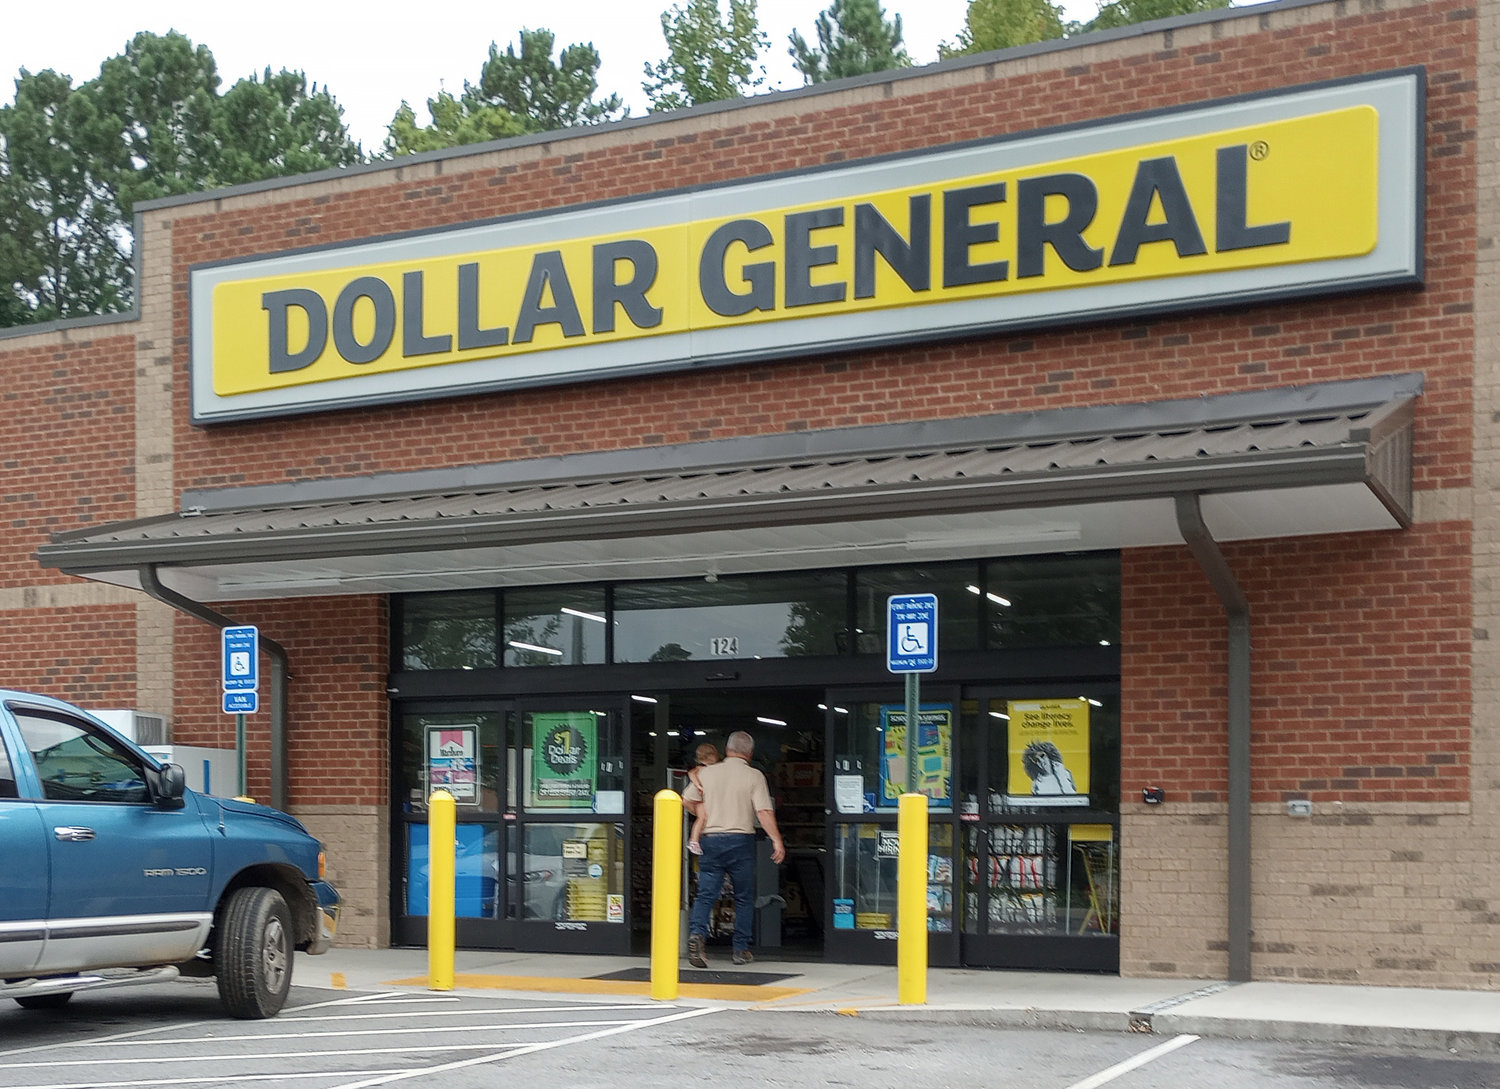 A customer enters a Dollar General store in Dallas, Ga., Wednesday, Aug. 17, 2022. (Christian Index/Henry Durand, File)